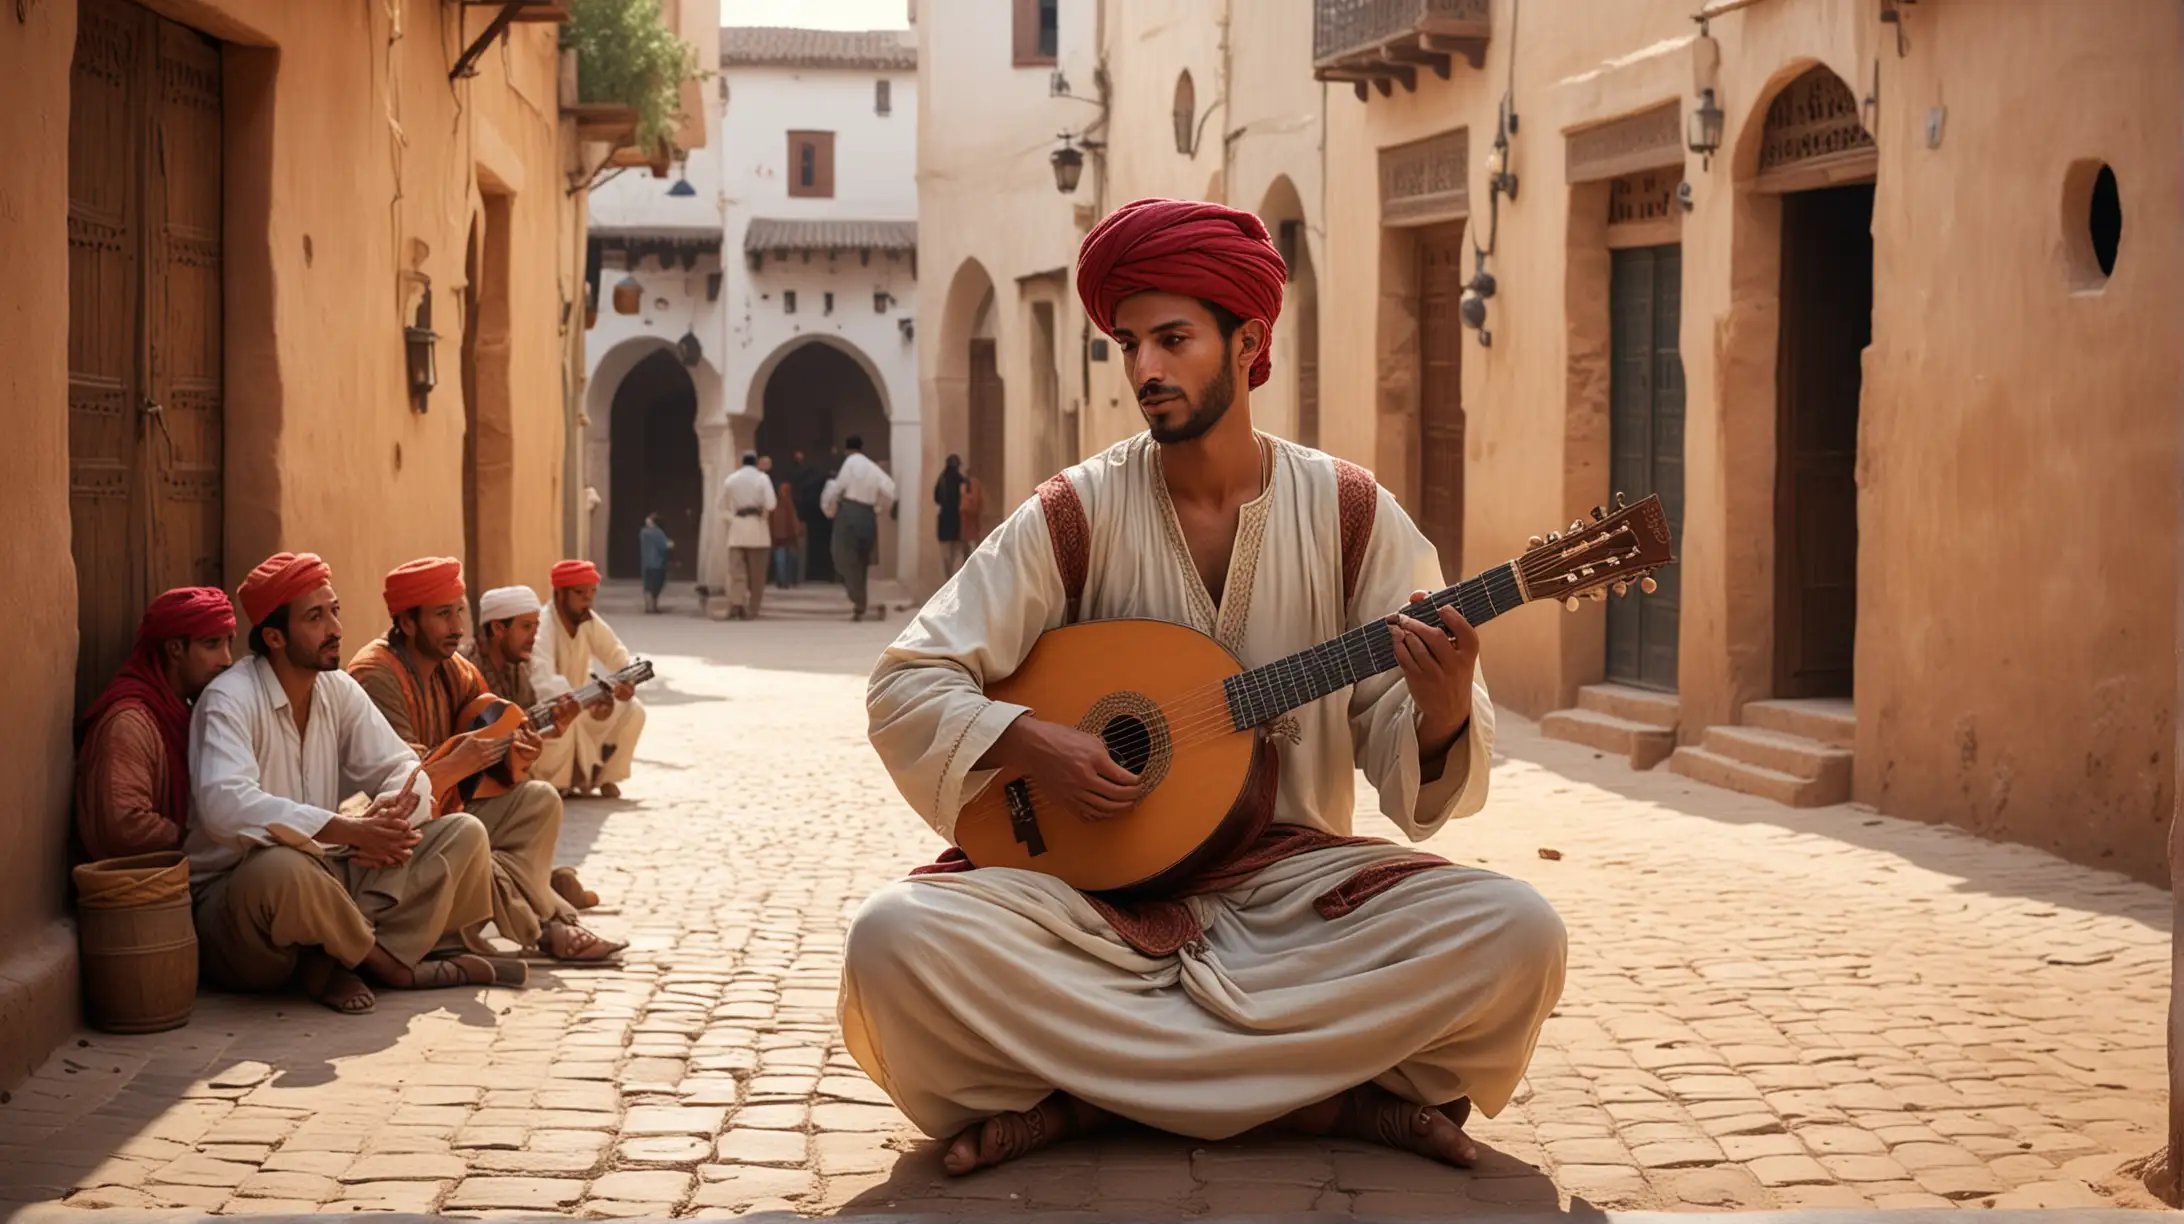 Moroccan Lute Musician Performs in Traditional Village Square